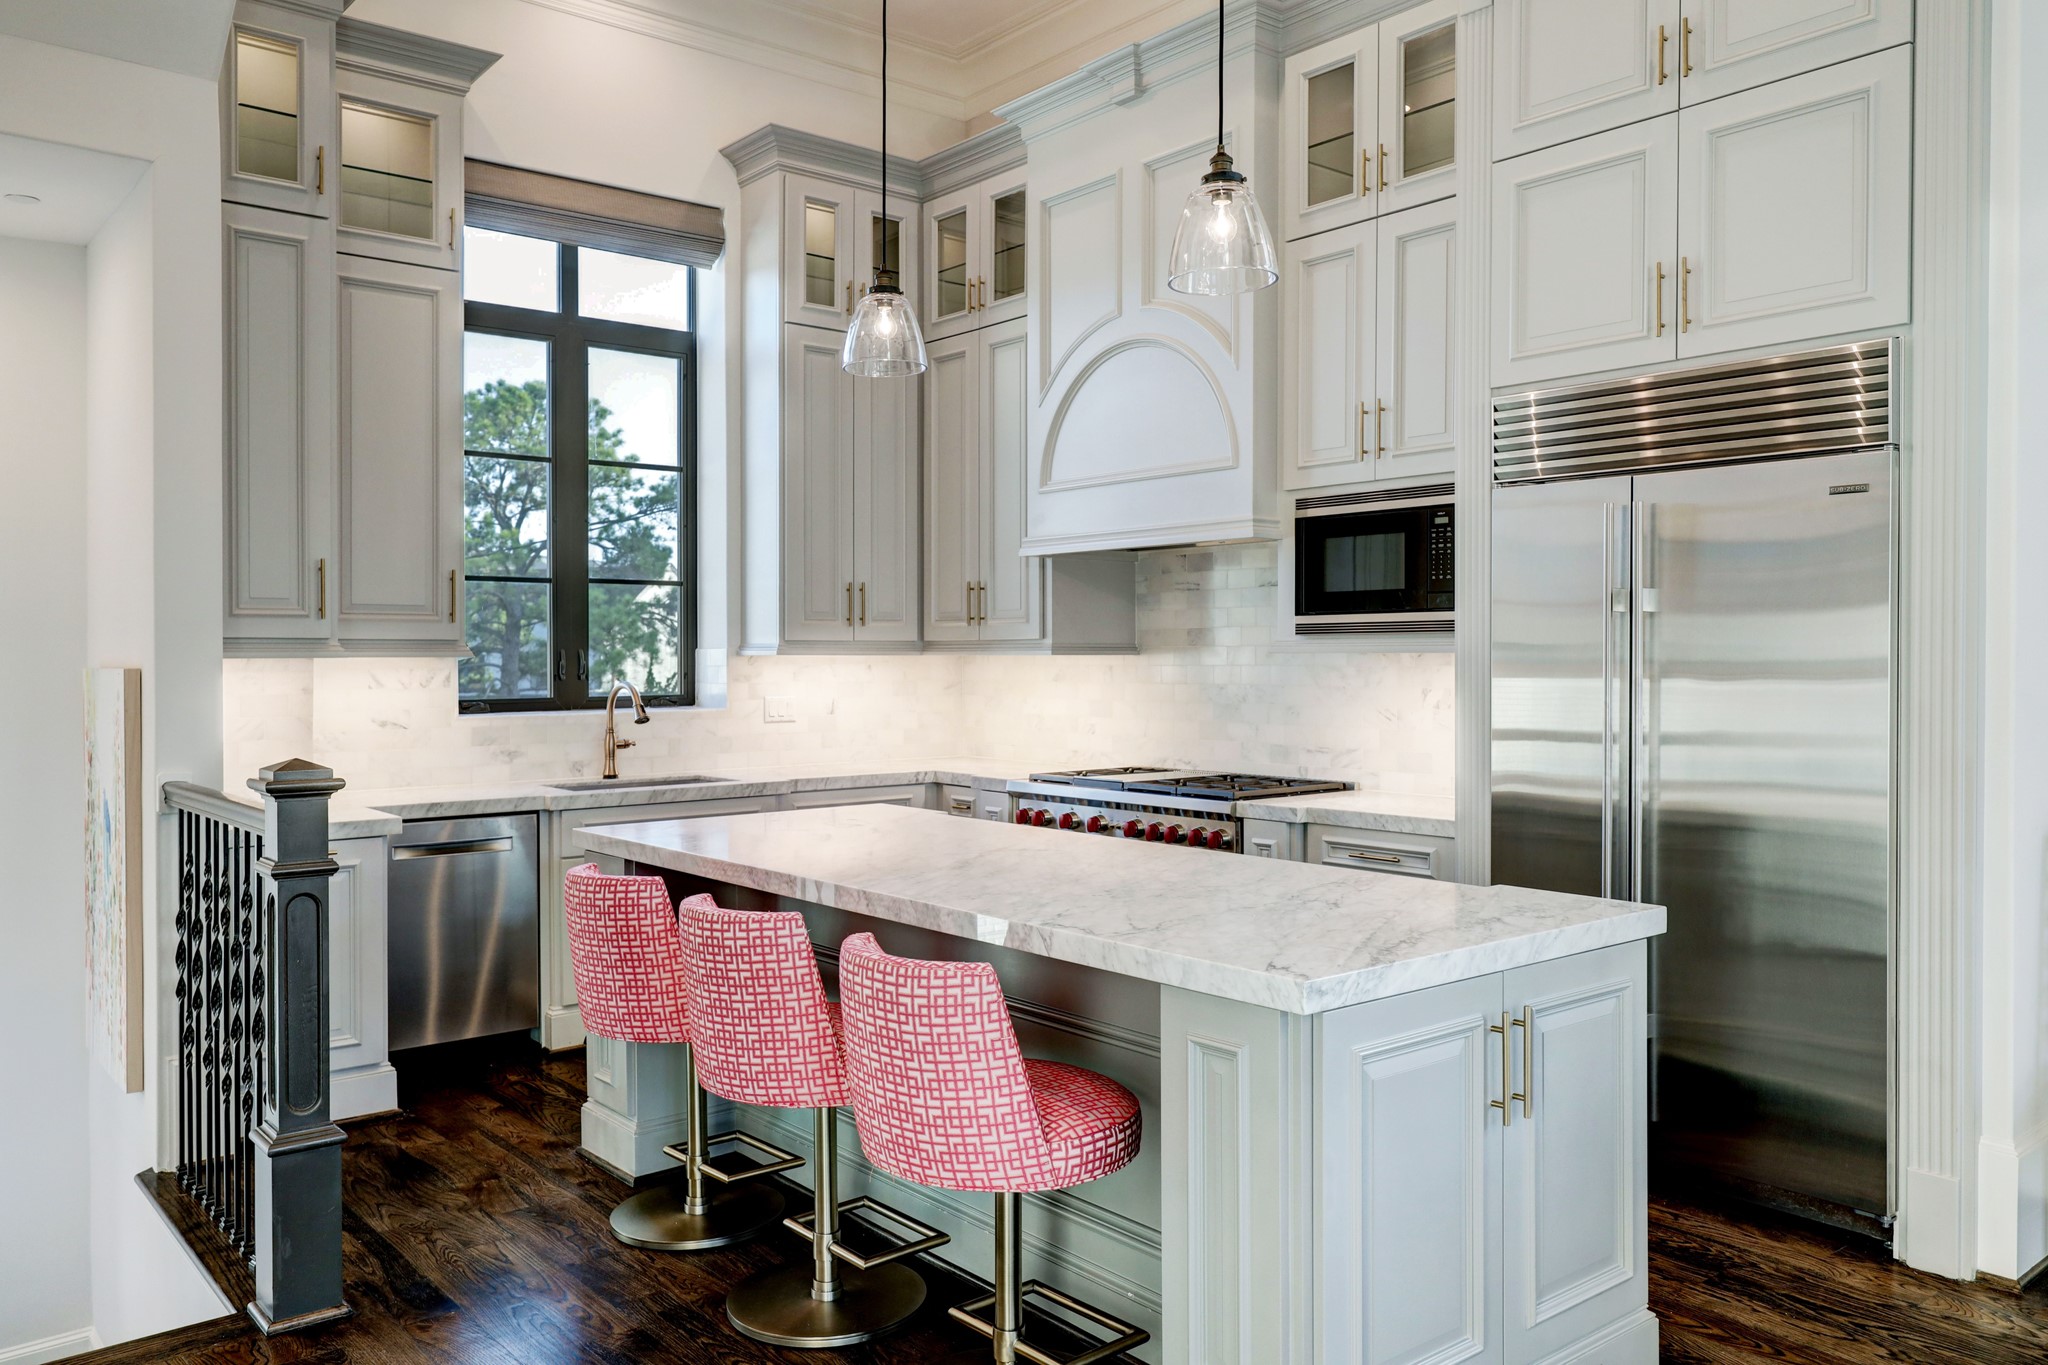 The kitchen features glass front cabinets, soft-close cabinets and drawers and marble countertops and backsplash.